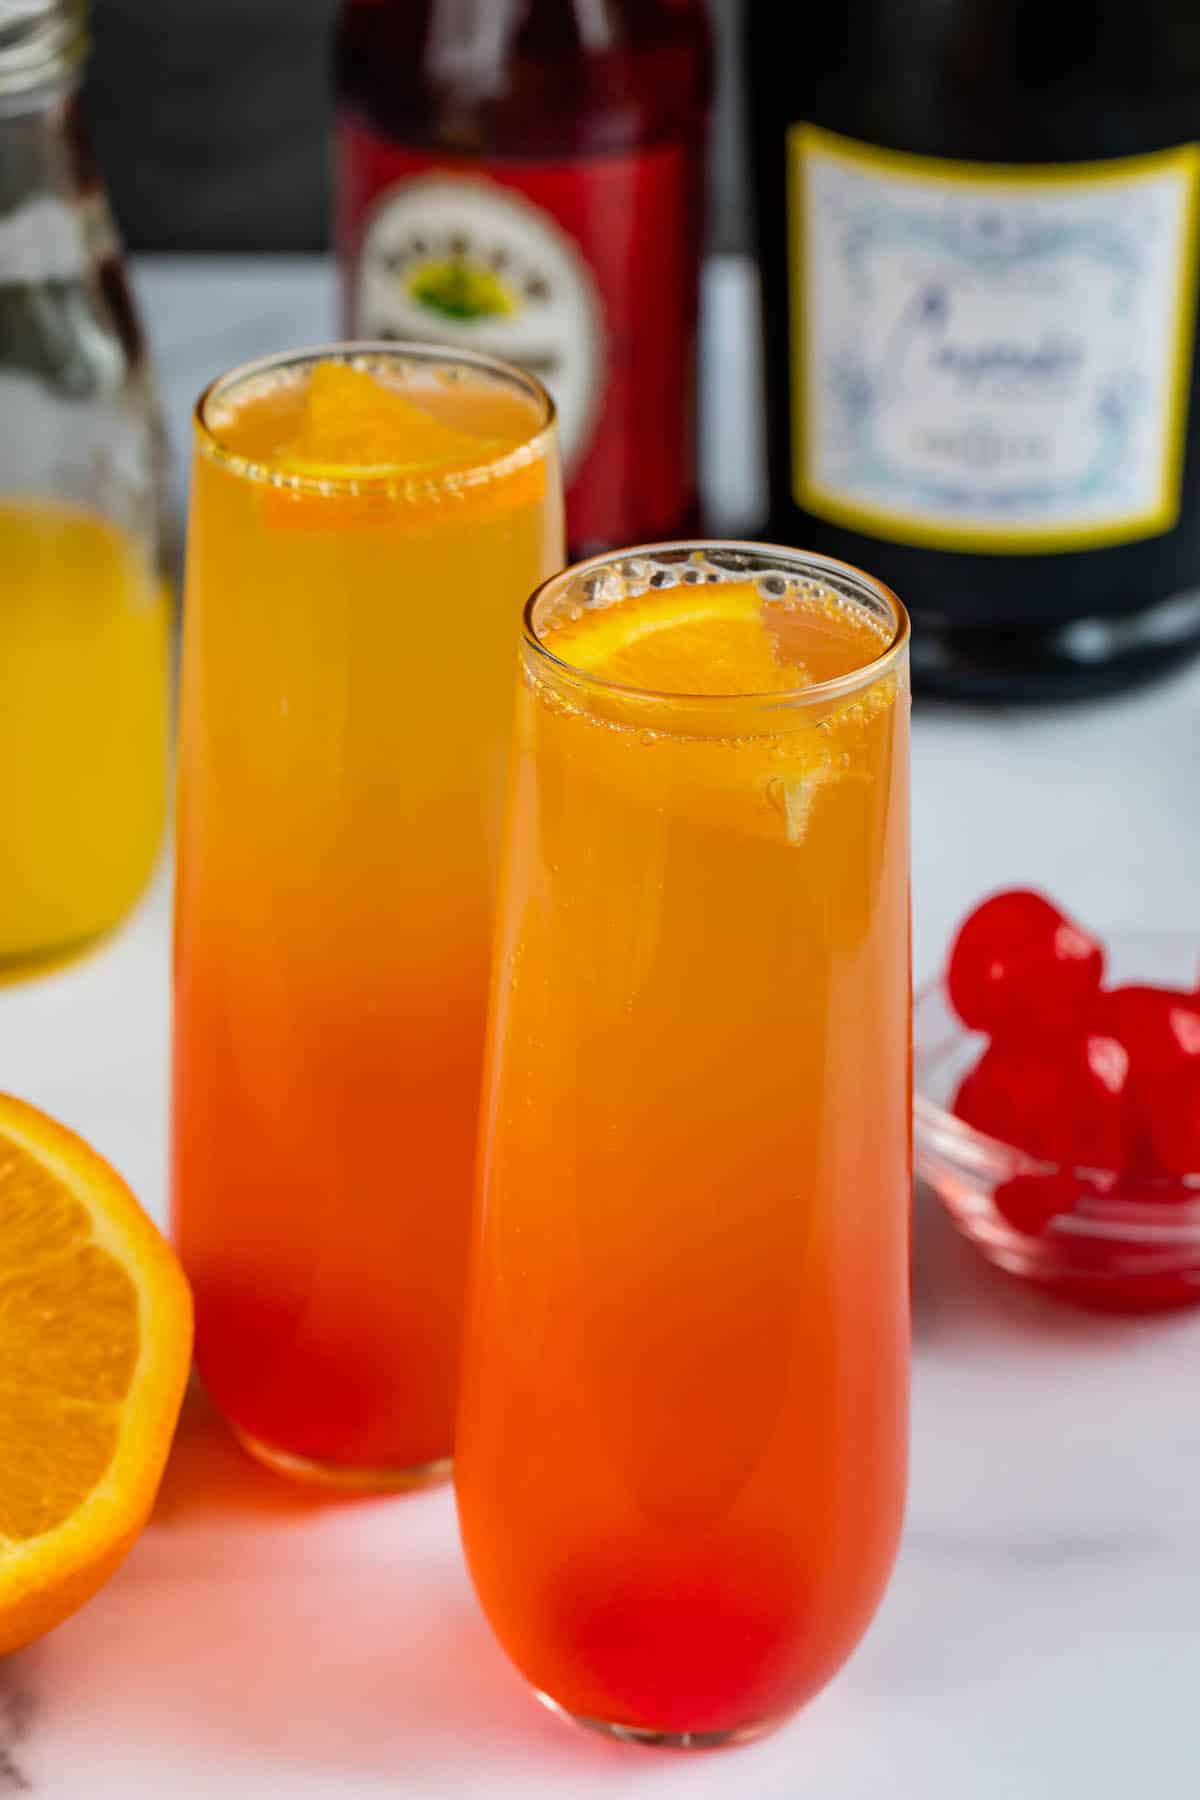 30 Best Mimosa Recipes - Easy Mimosa Cocktails